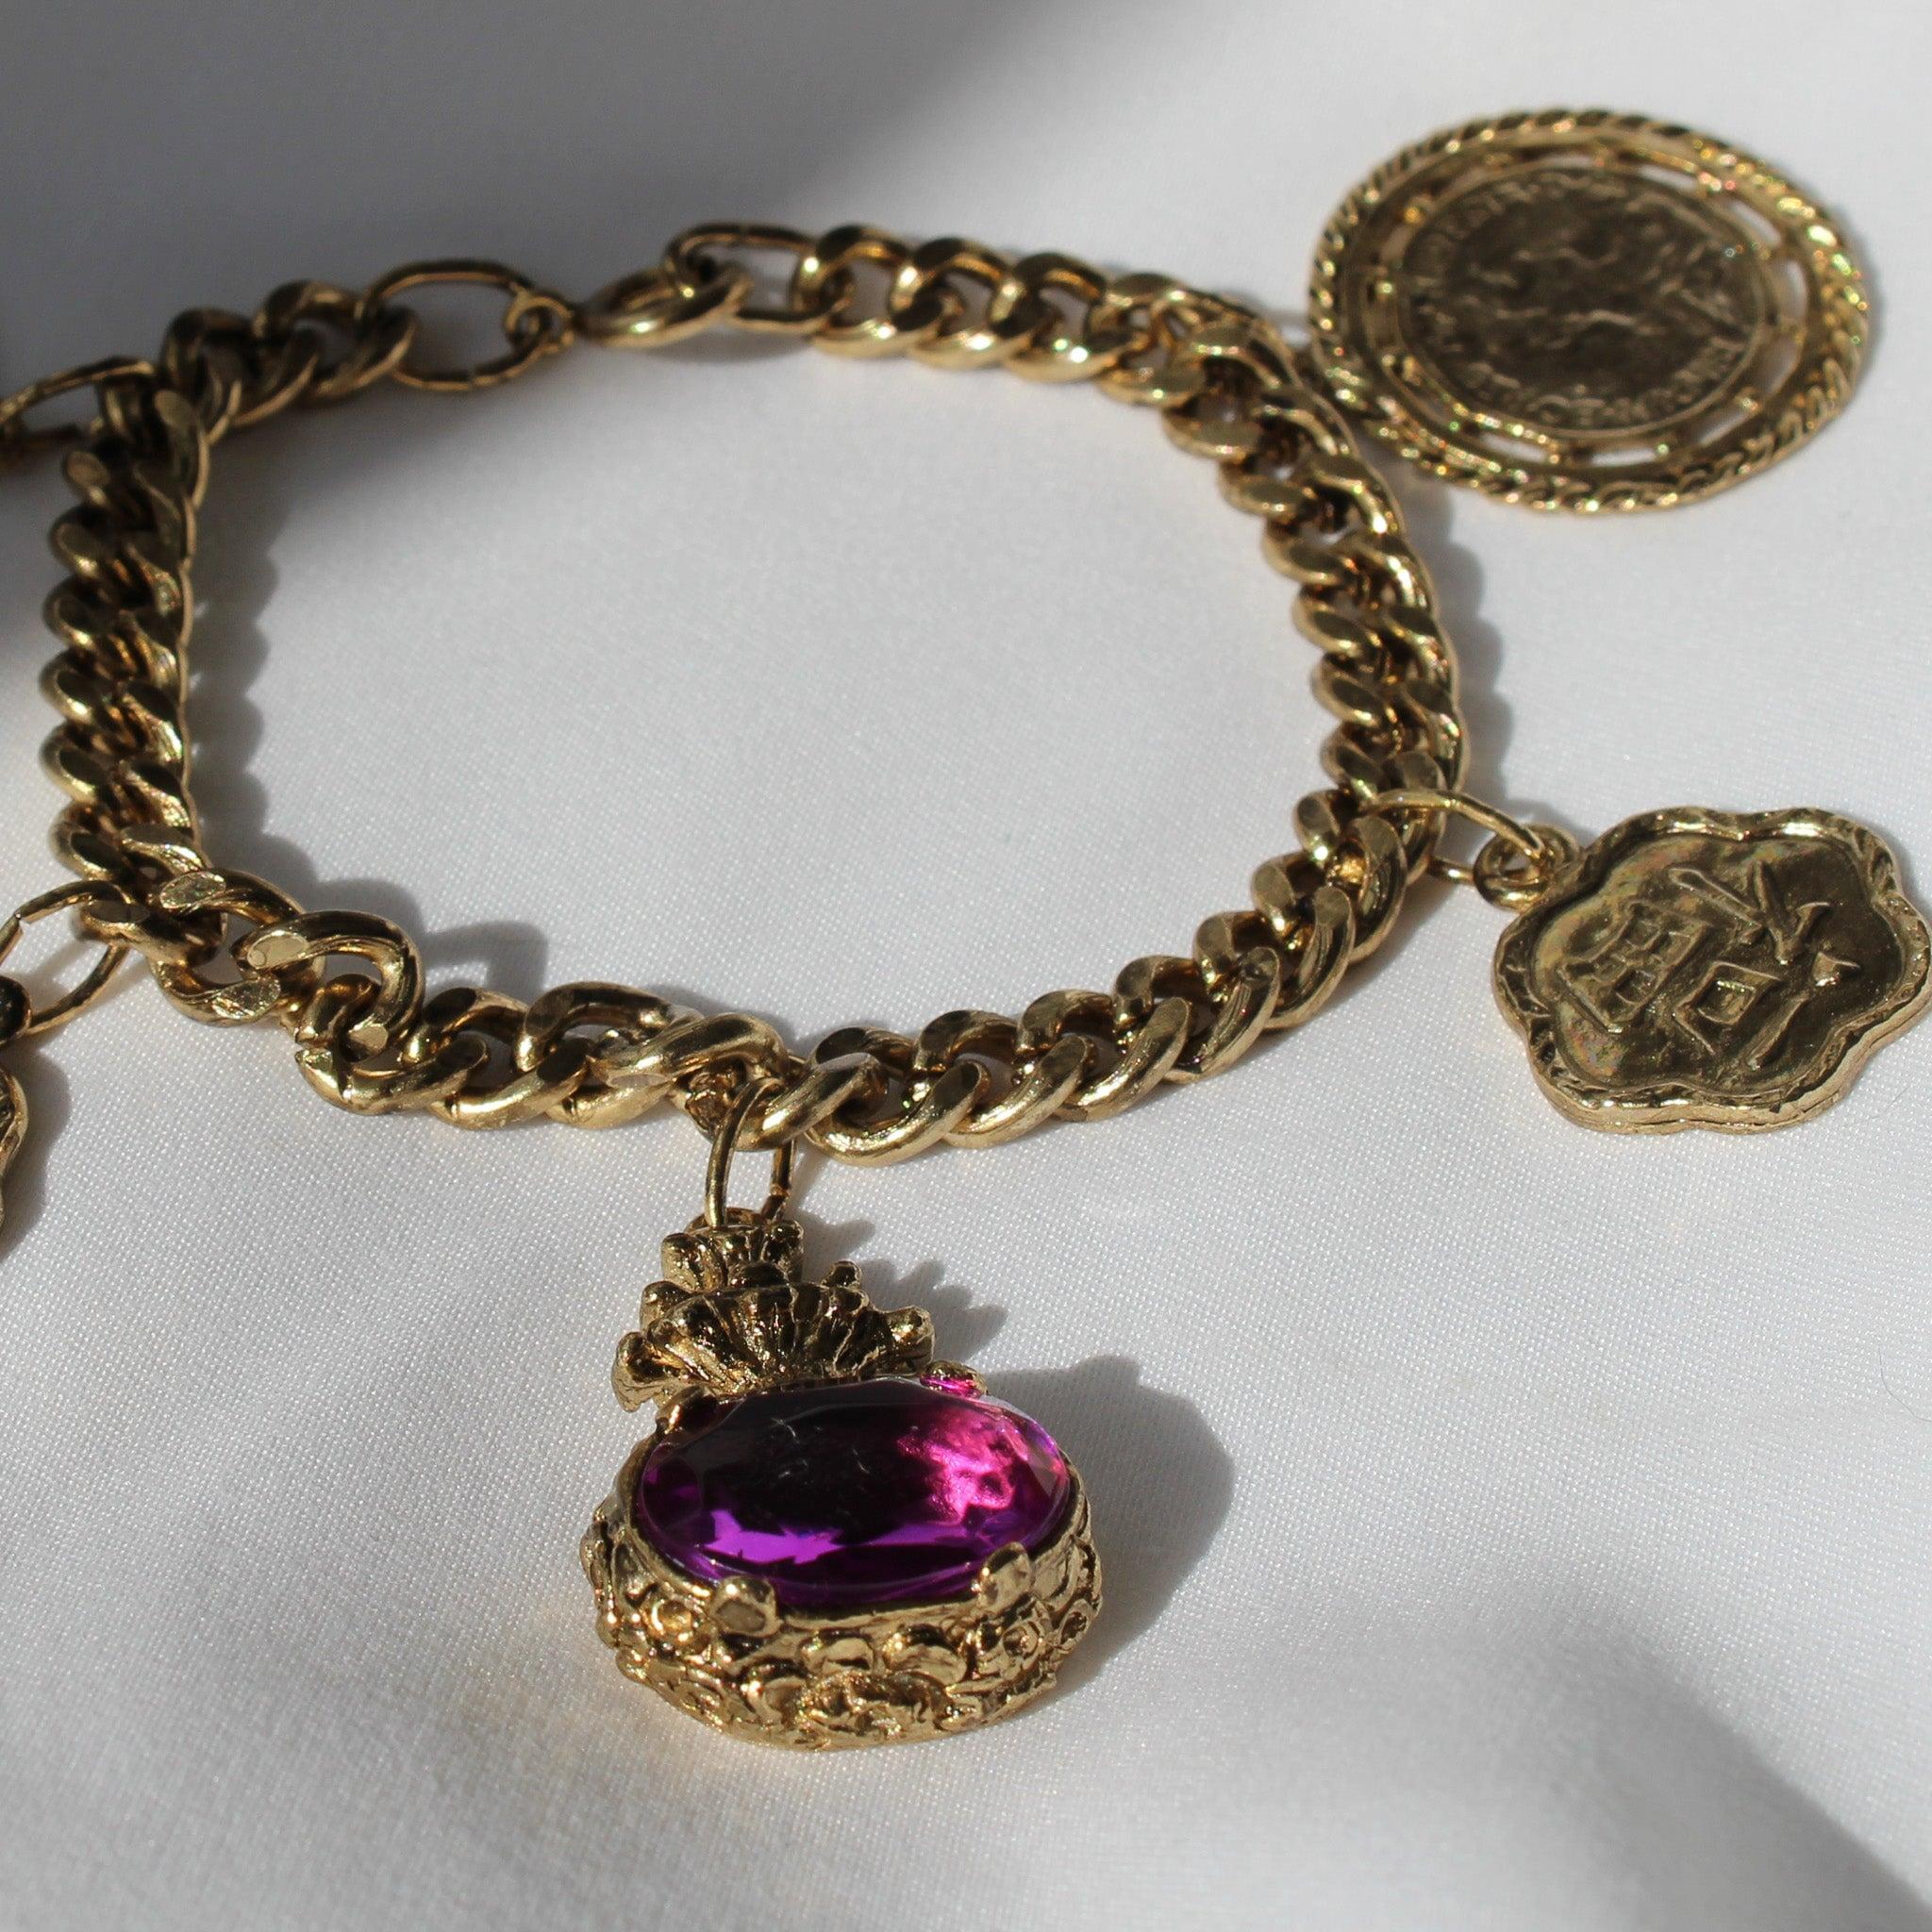 Vintage 1980s Charm Bracelet - Vintage Deadstock In New Condition For Sale In London, GB